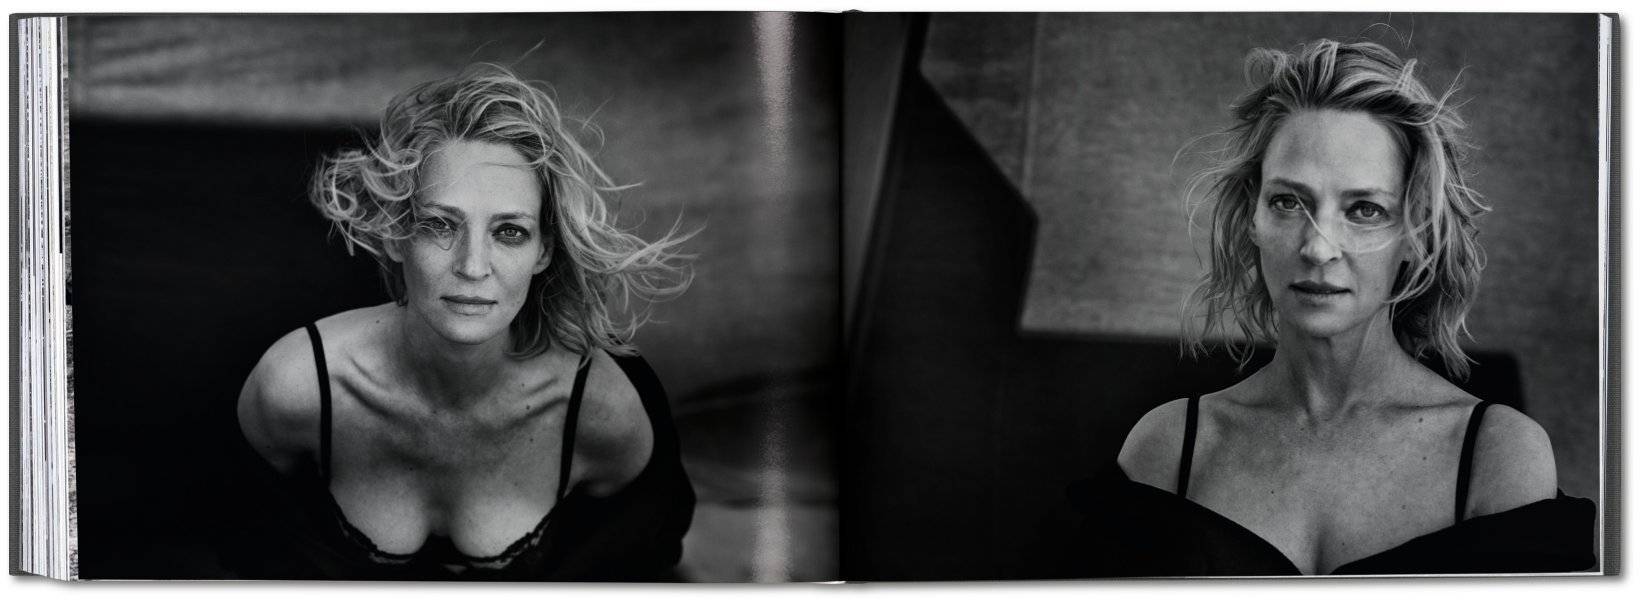 “Shadows on the Wall”: Peter Lindbergh captures today’s great actresses